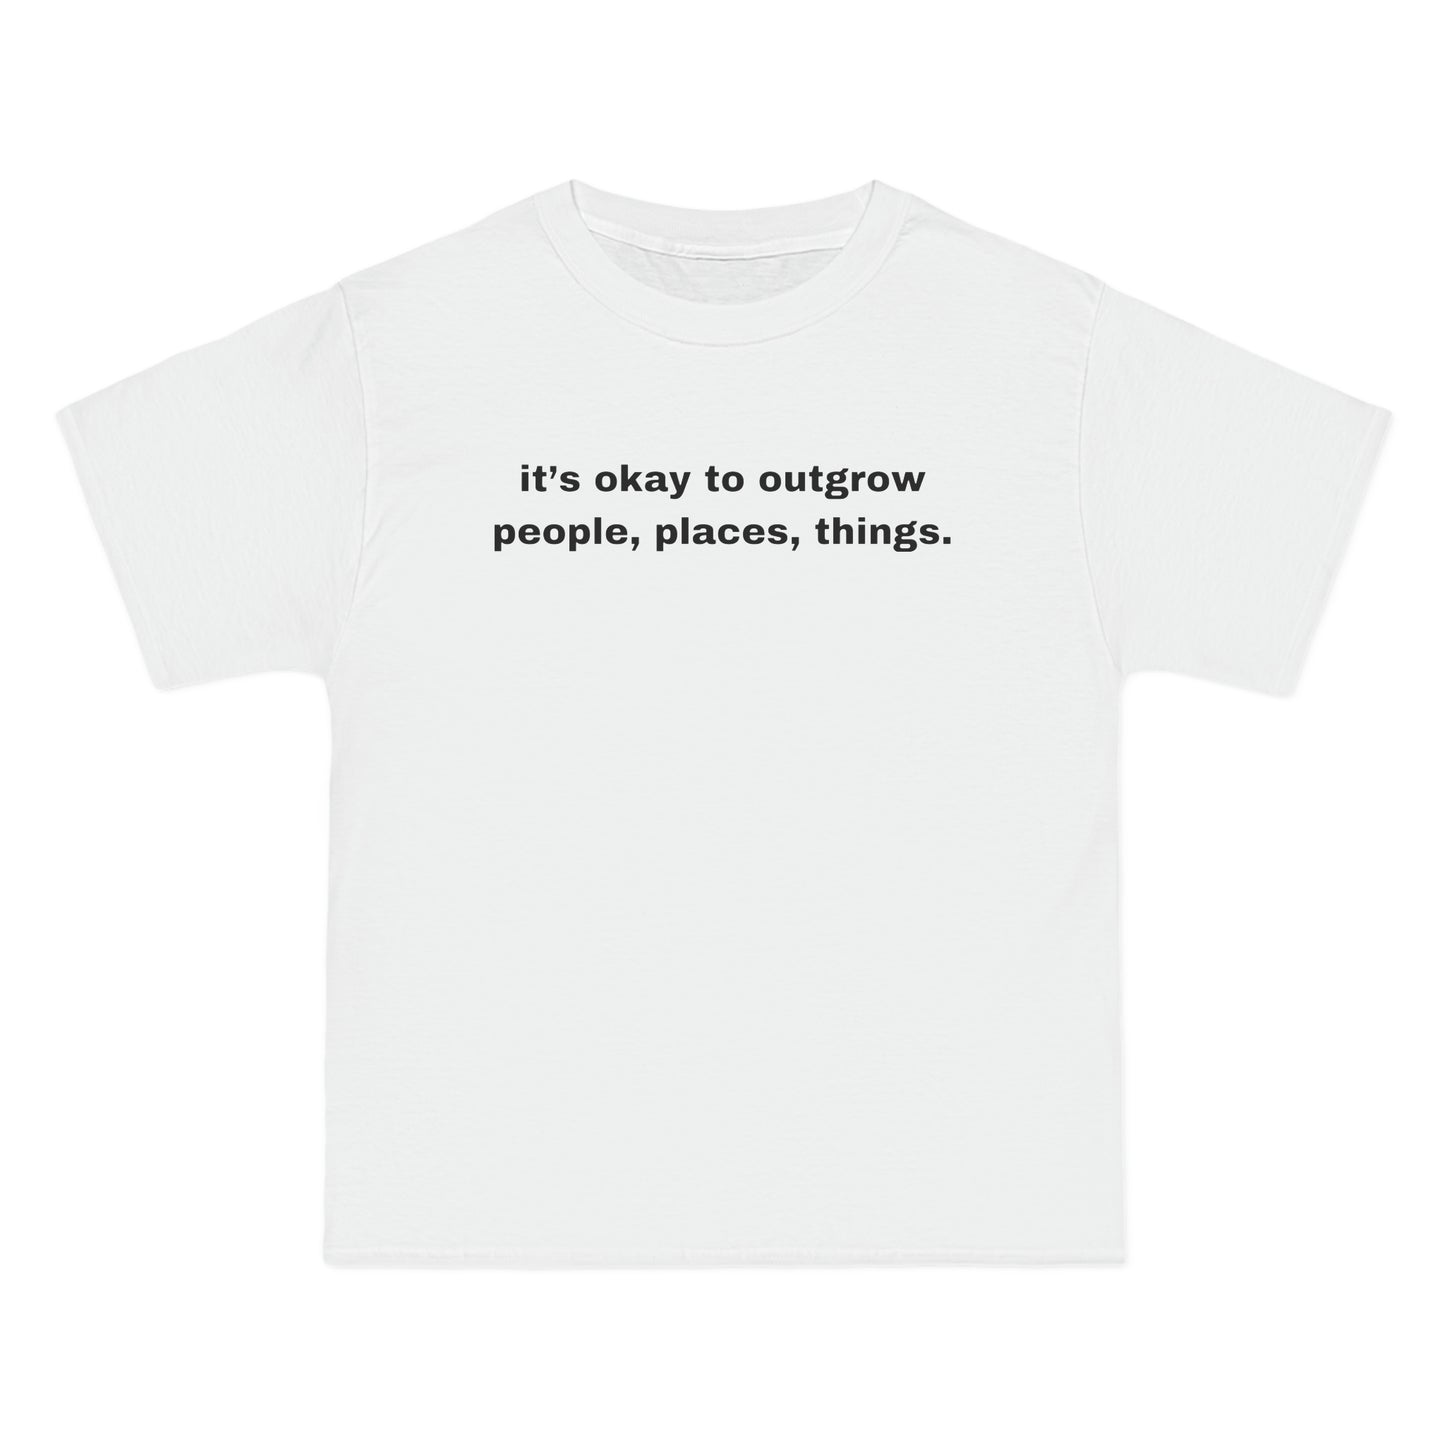 it’s okay to outgrow people, places, things. Tee